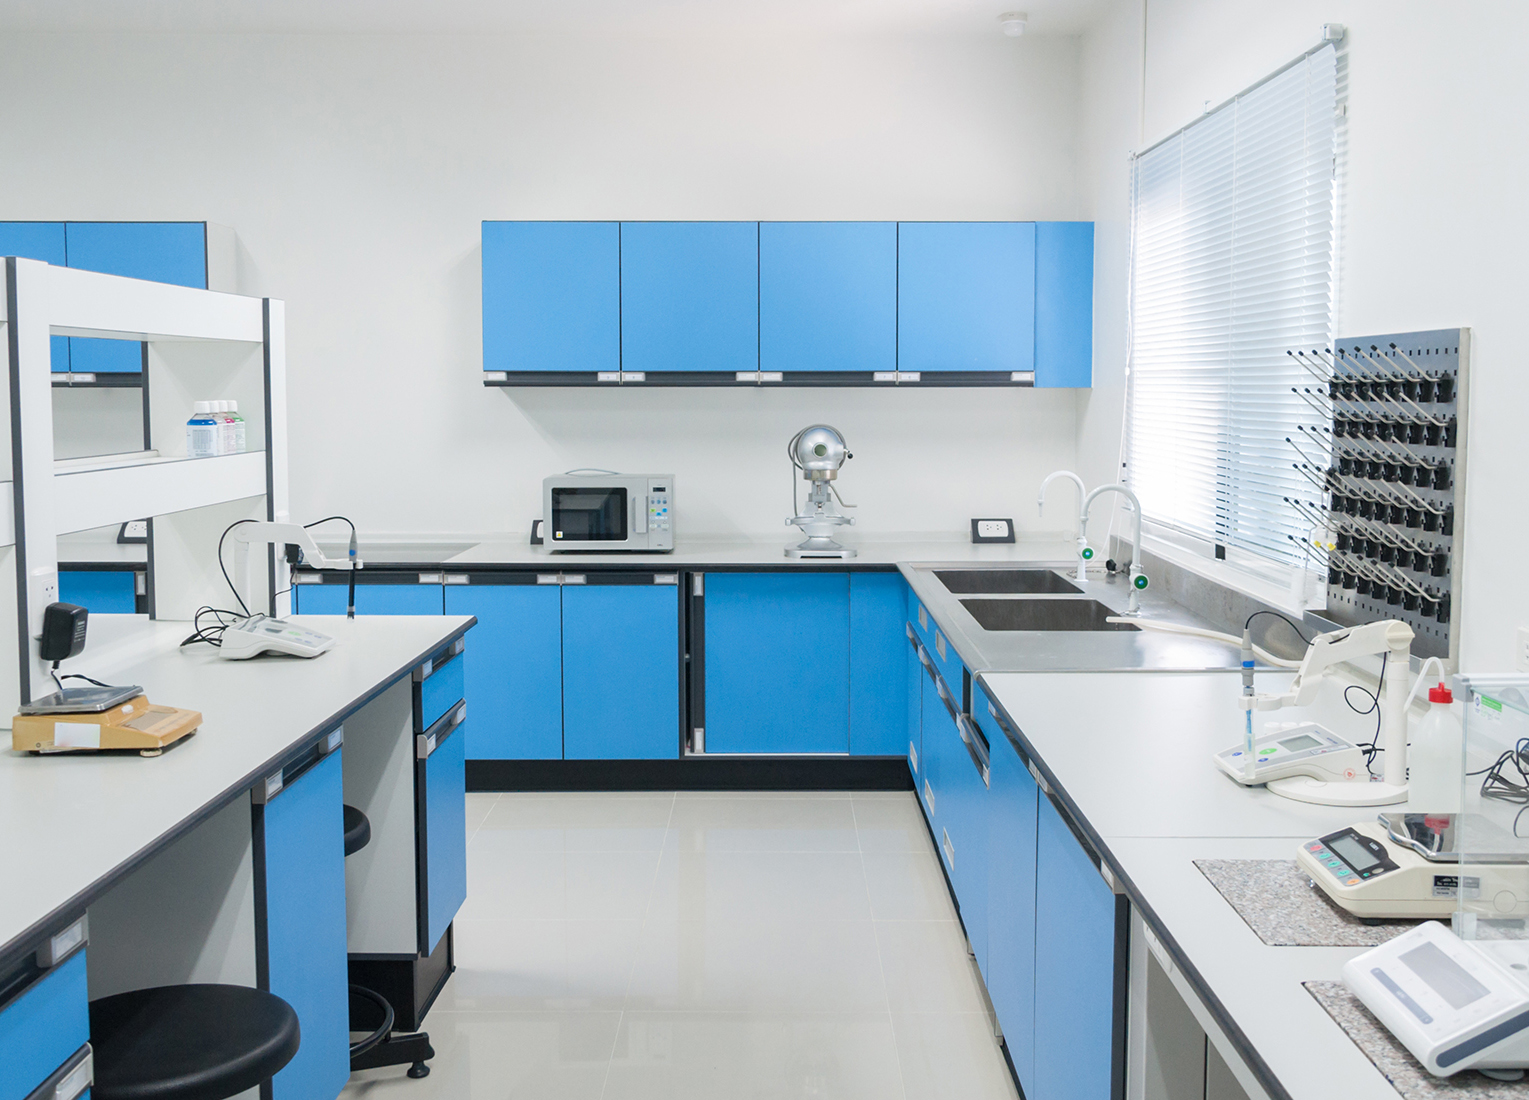 What are the material choices of the laboratory all-steel test bench